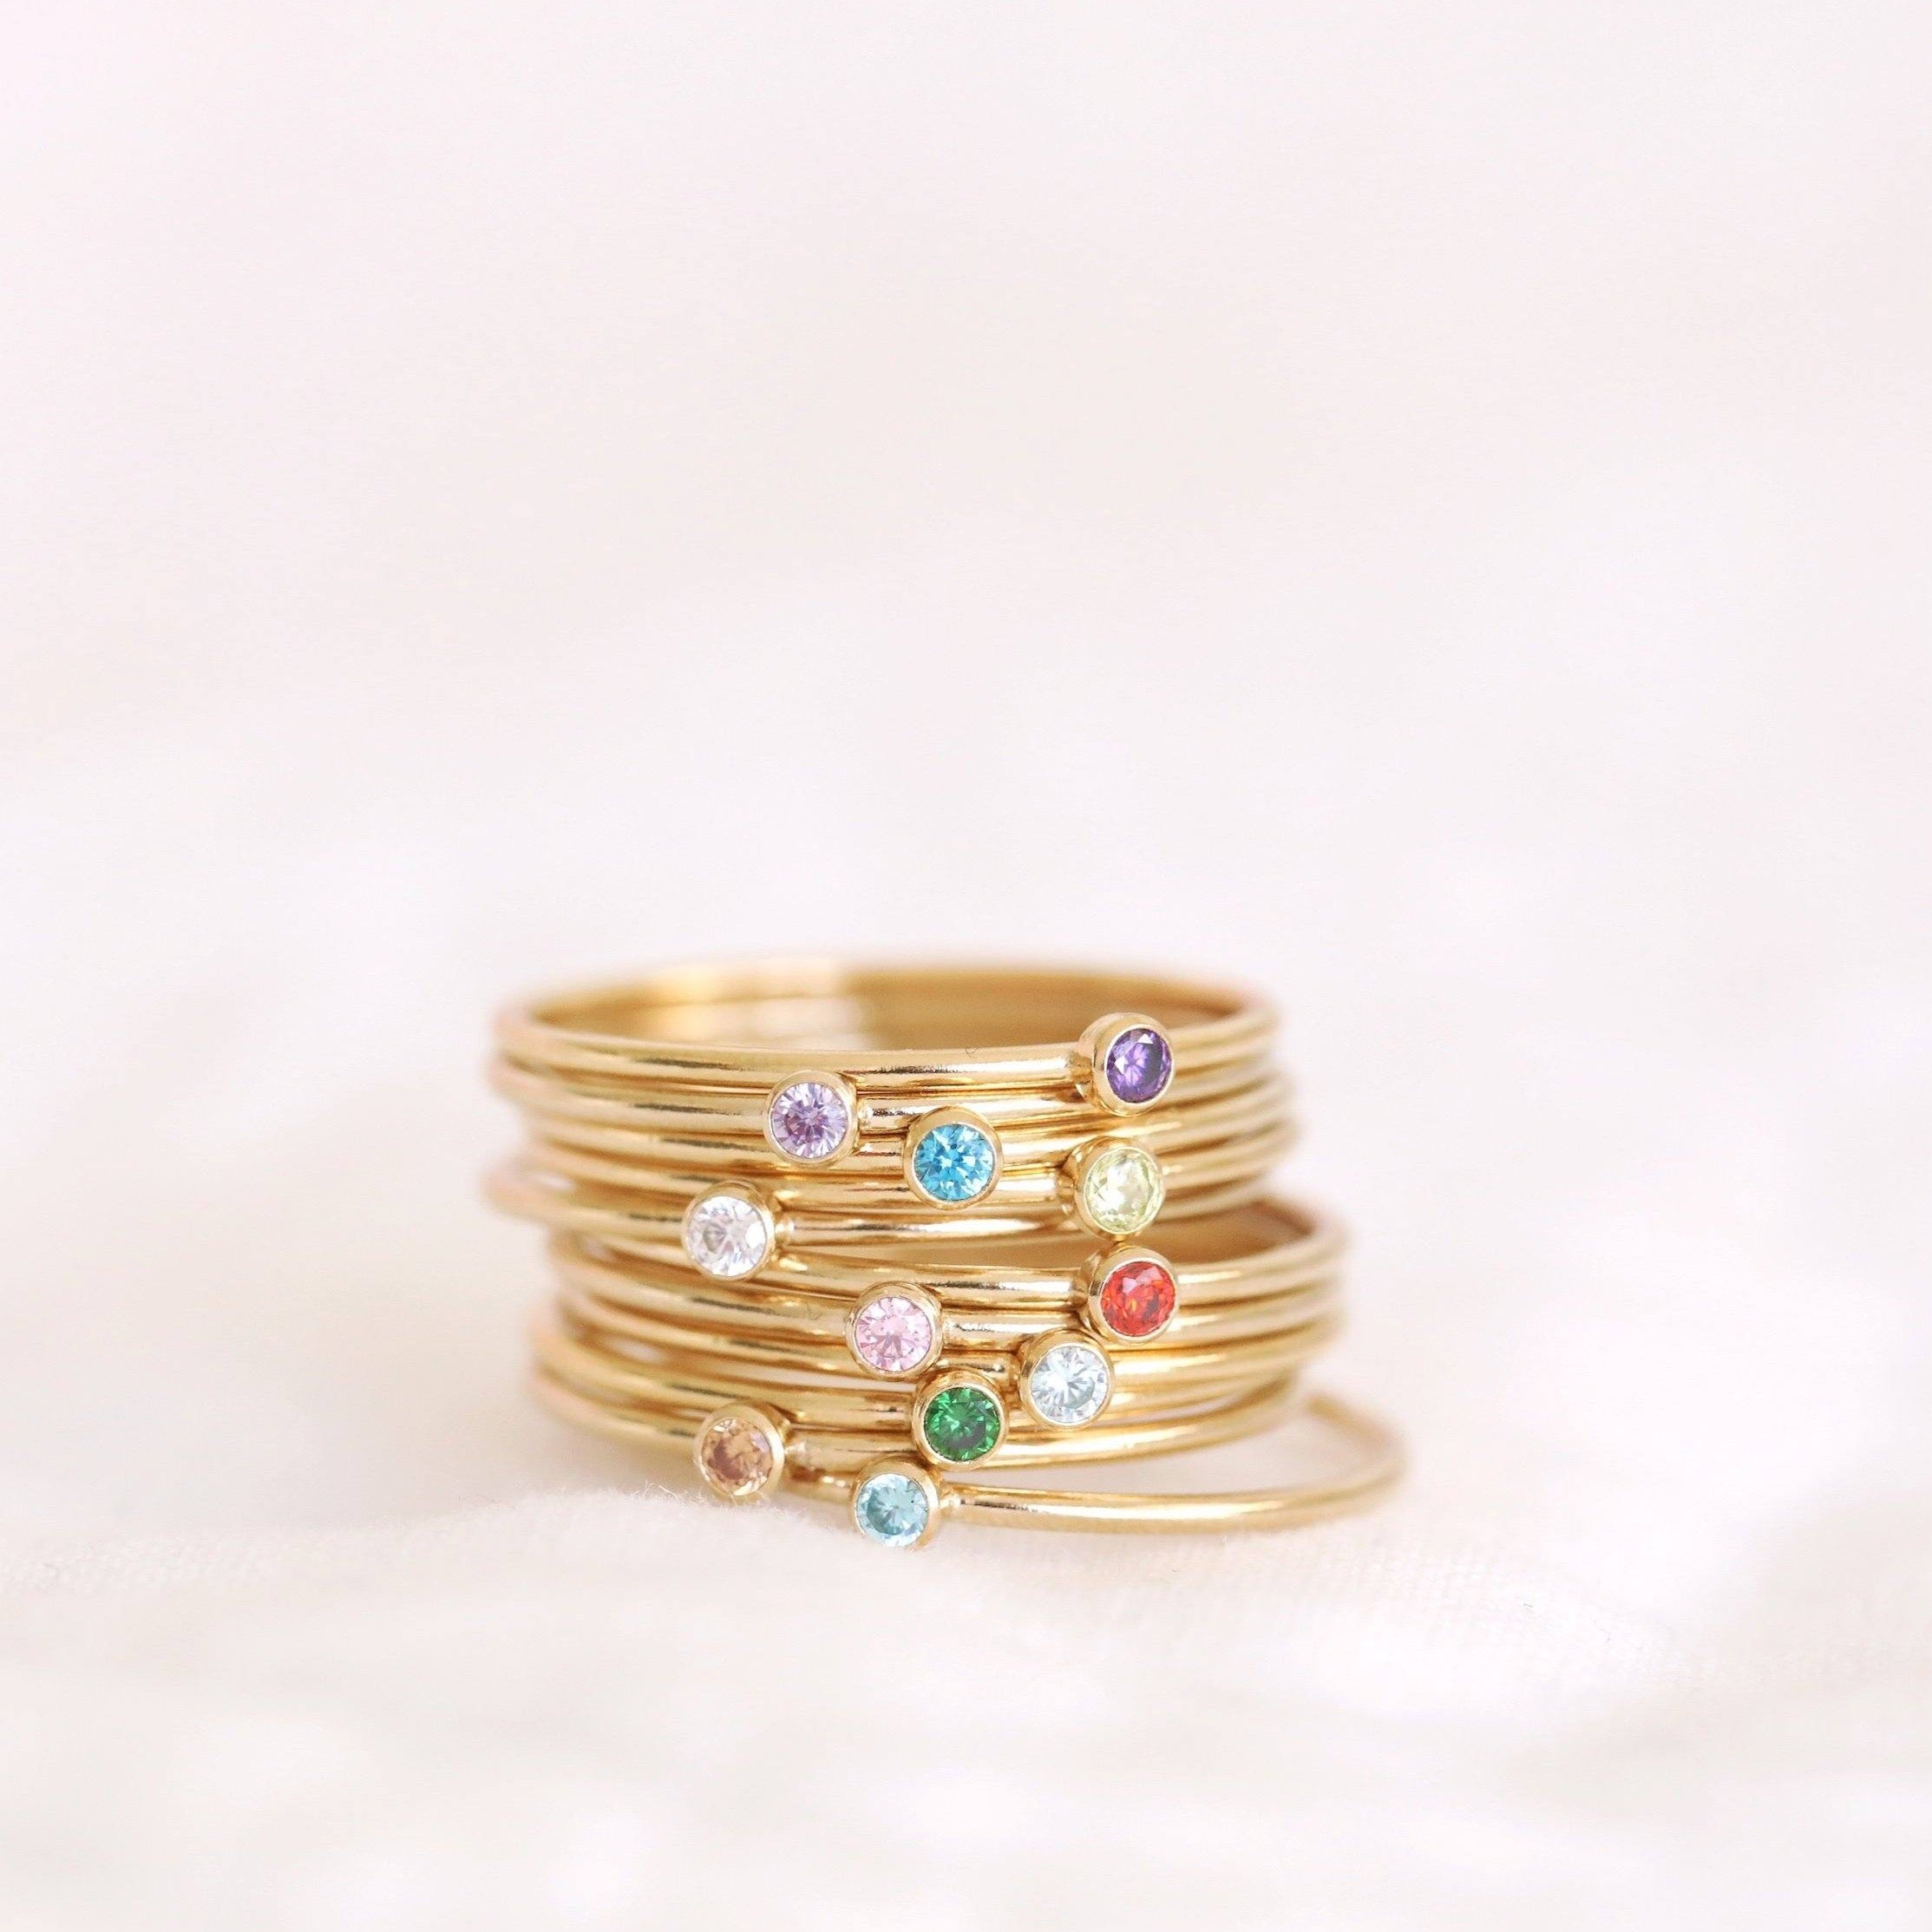 Handmade birthstone rings made with sterling silver and gold-filled, ethically and sustainably made birthstone rings made in Canada